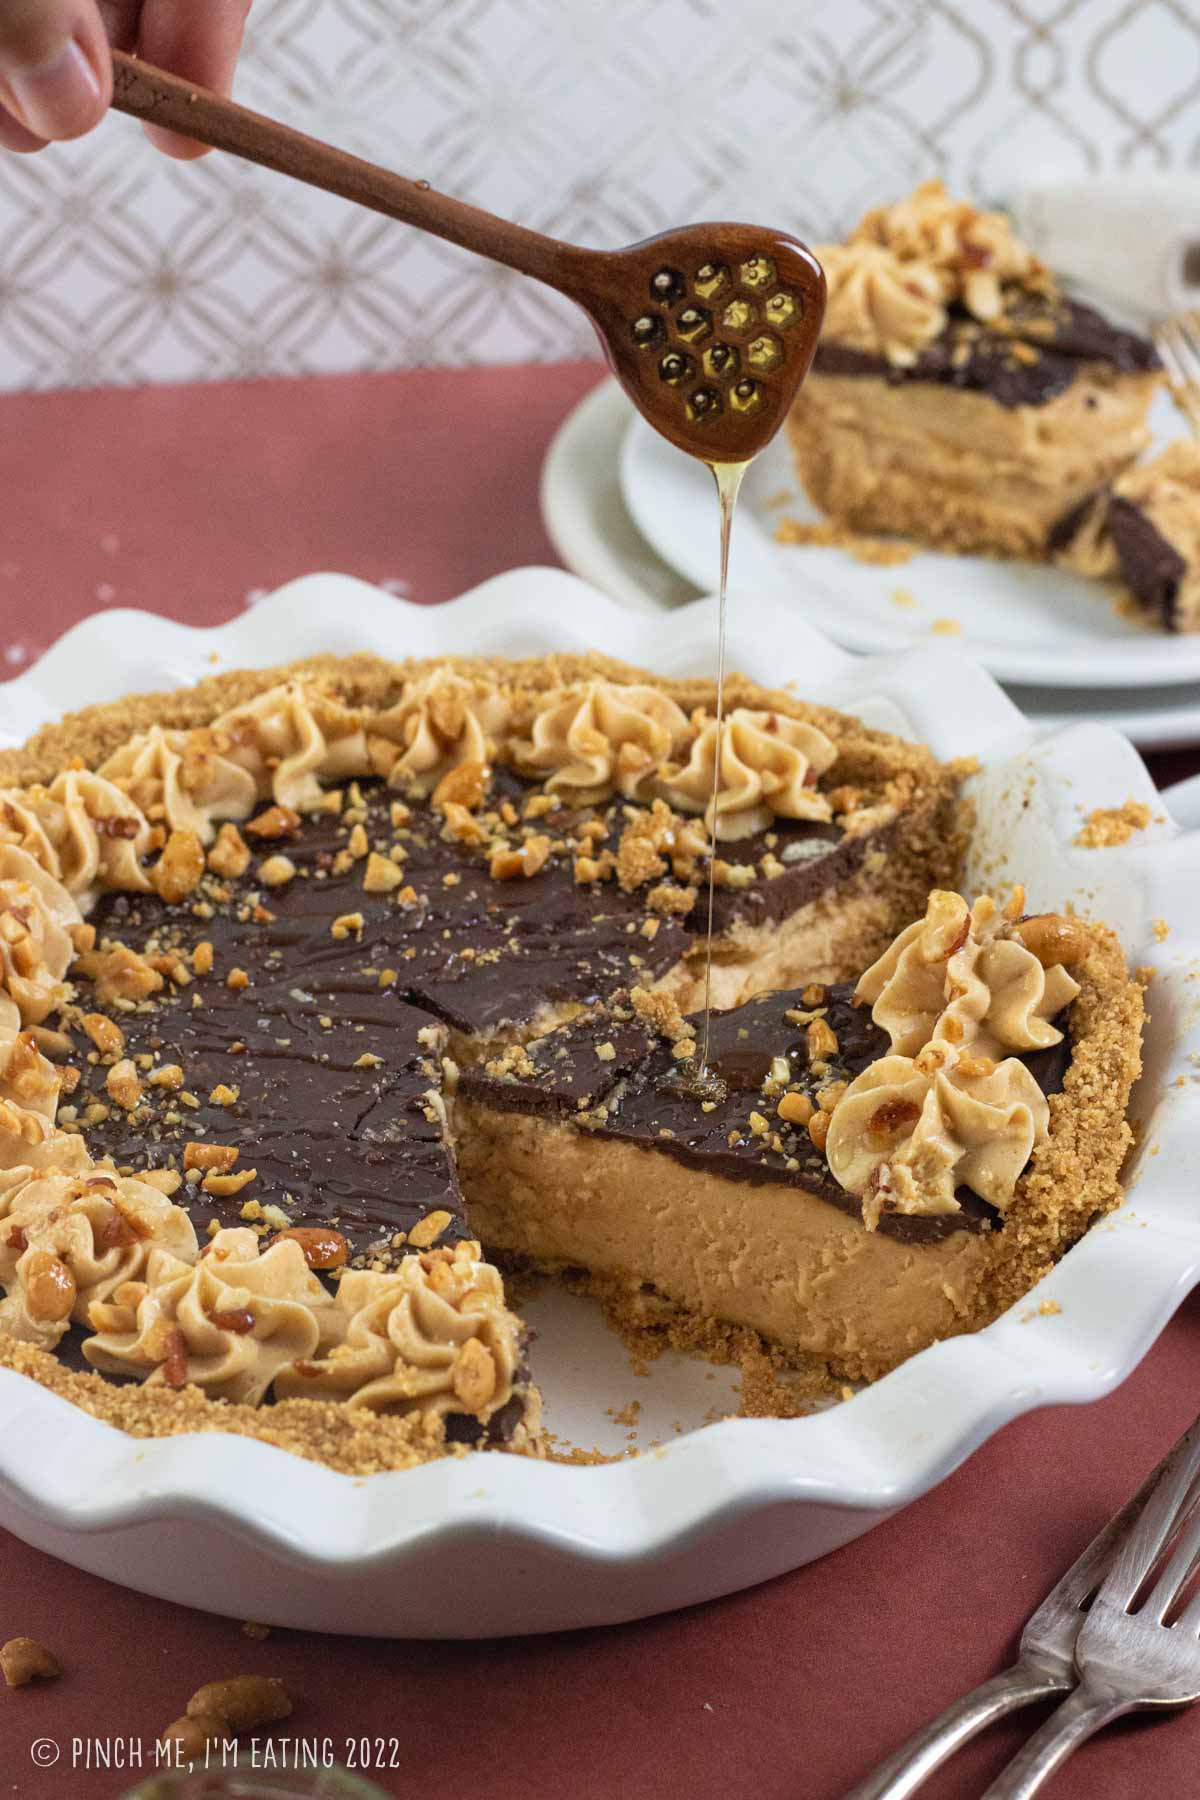 A pie pan filled with delicious peanut butter pie.